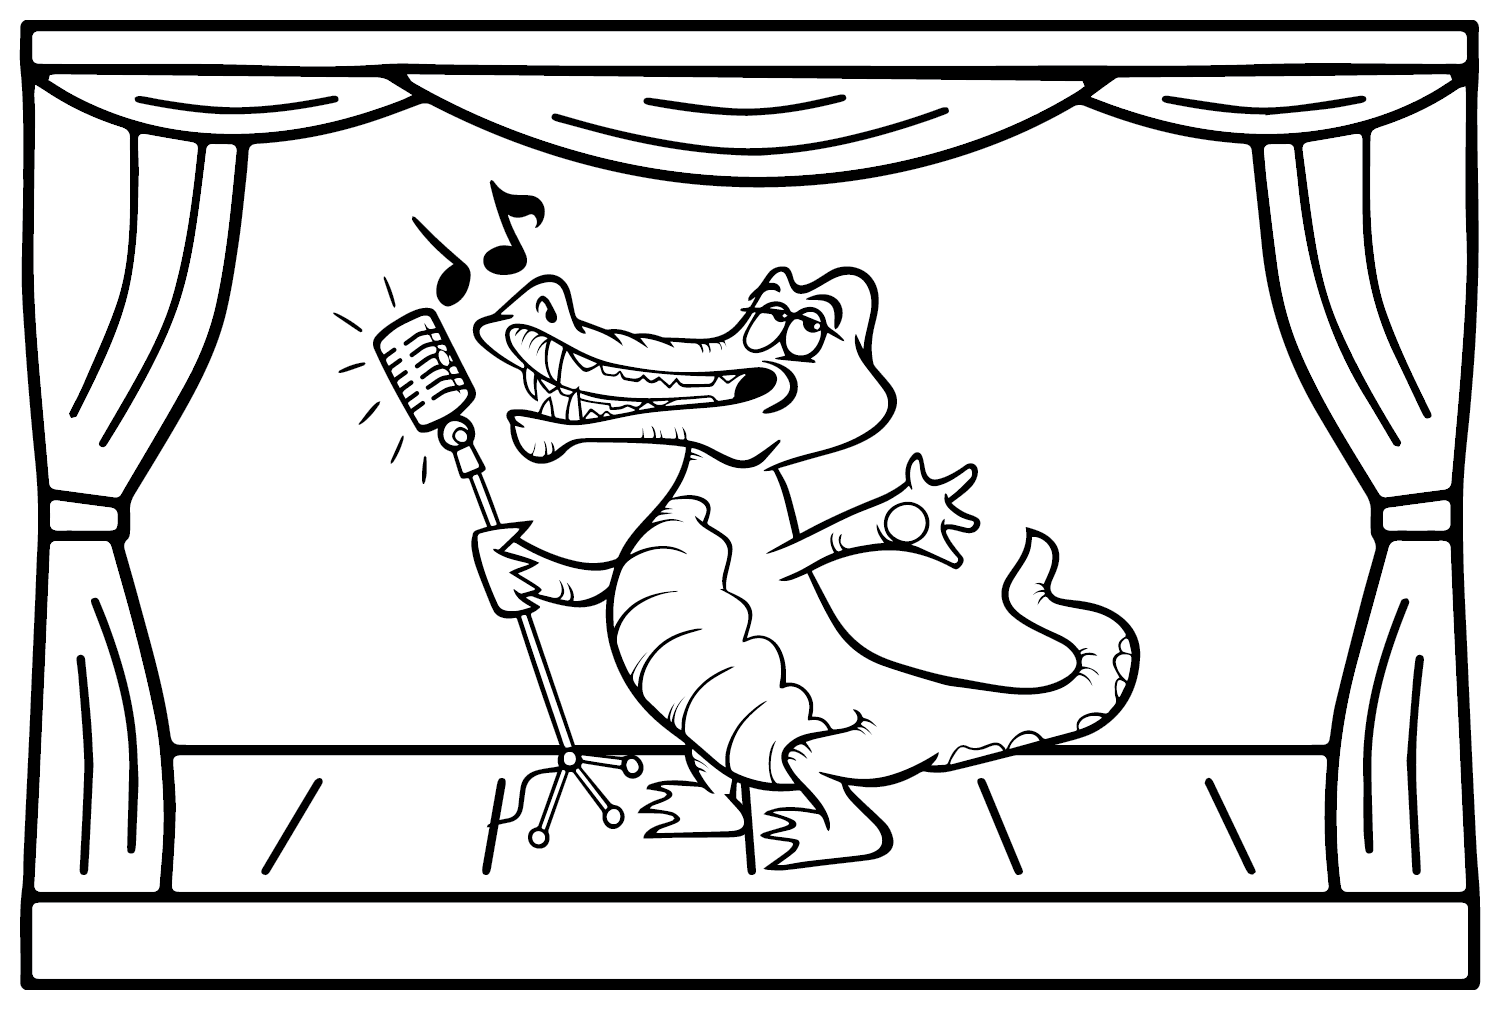 Crocodile Drawing Coloring Page from Crocodile